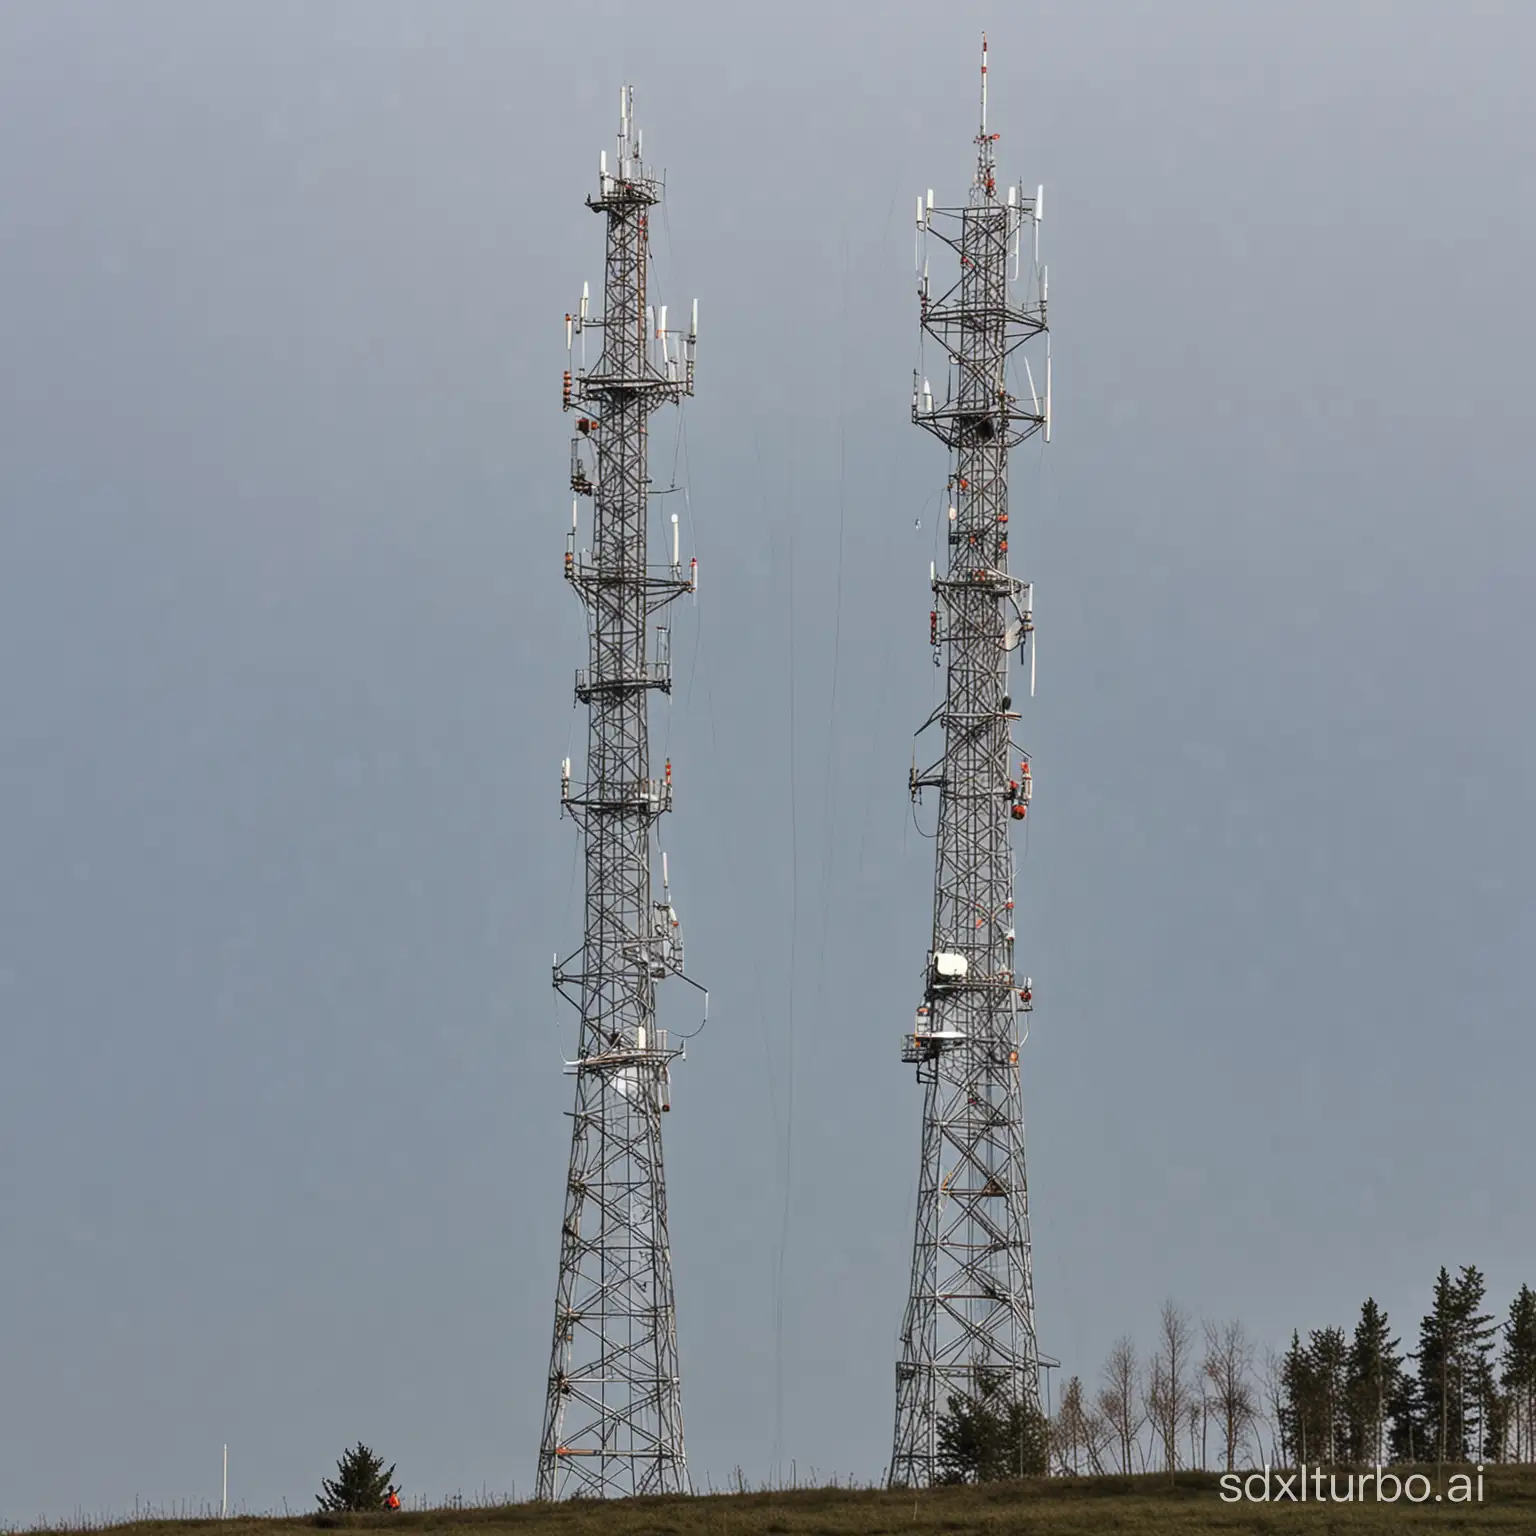 engineers install antennas for a cellular network on a telecommunications tower near Poznań